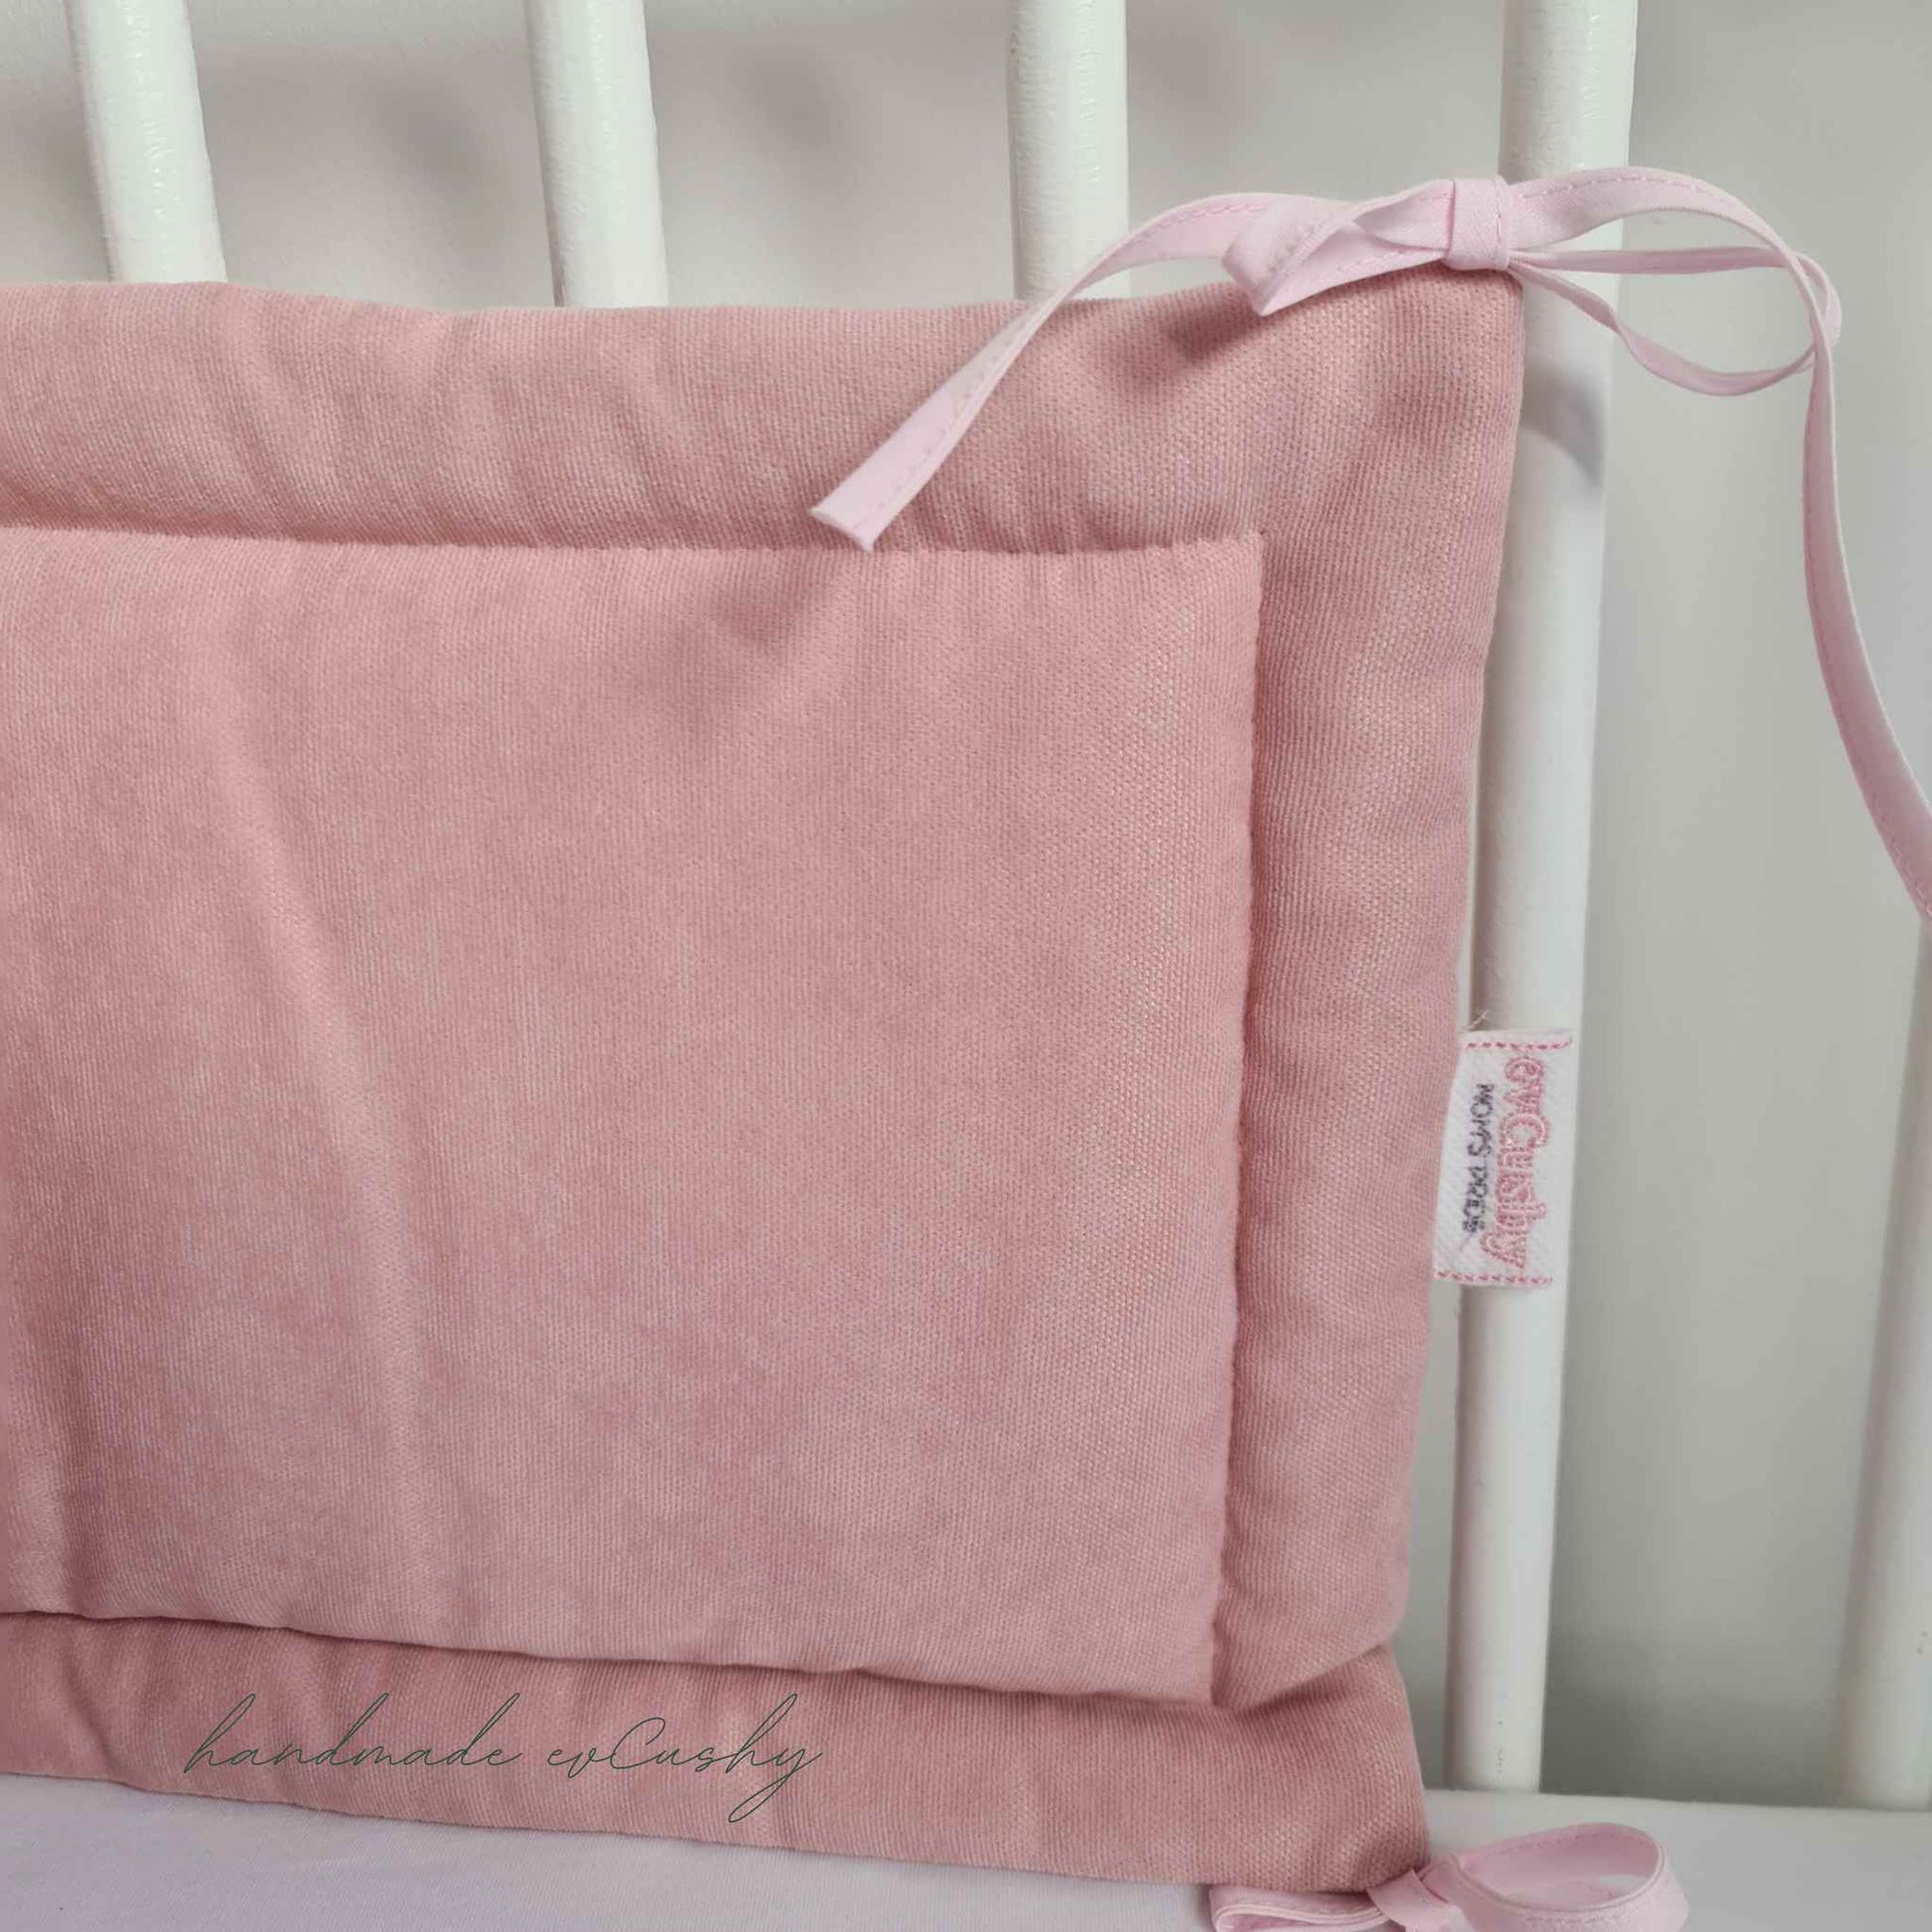 padded protector for baby crib pink 